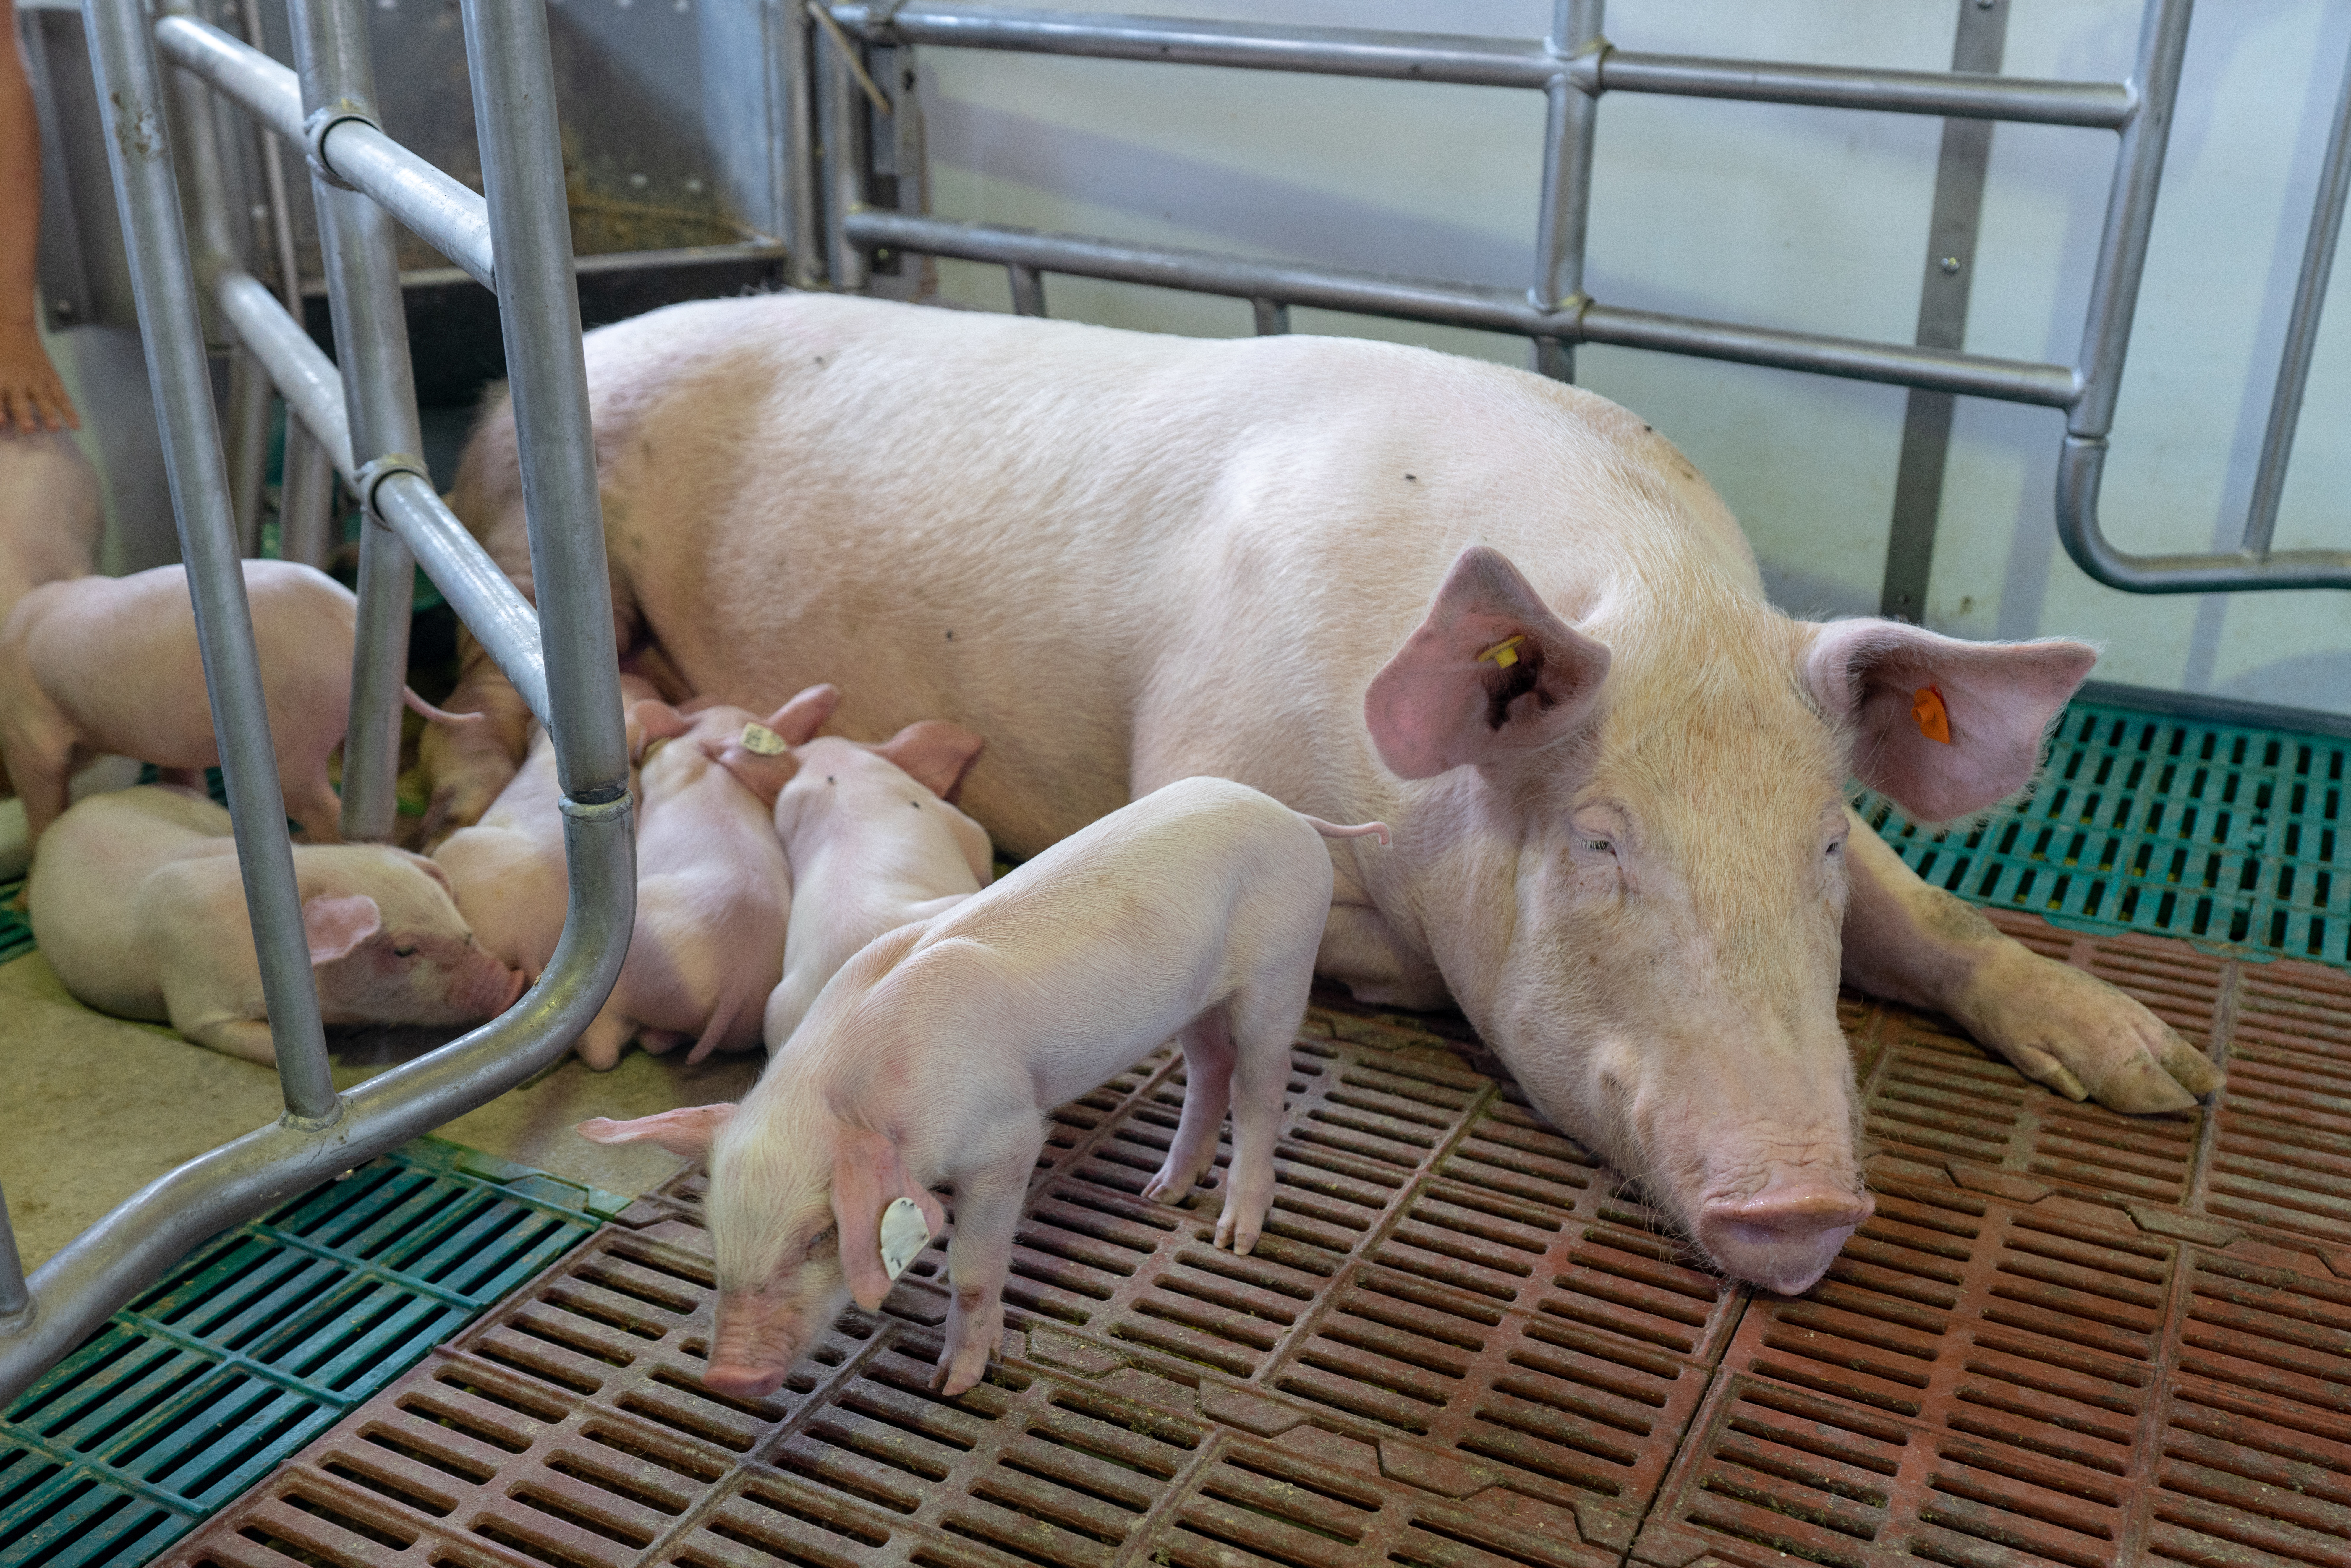 sow and piglets in a free farrowing pen